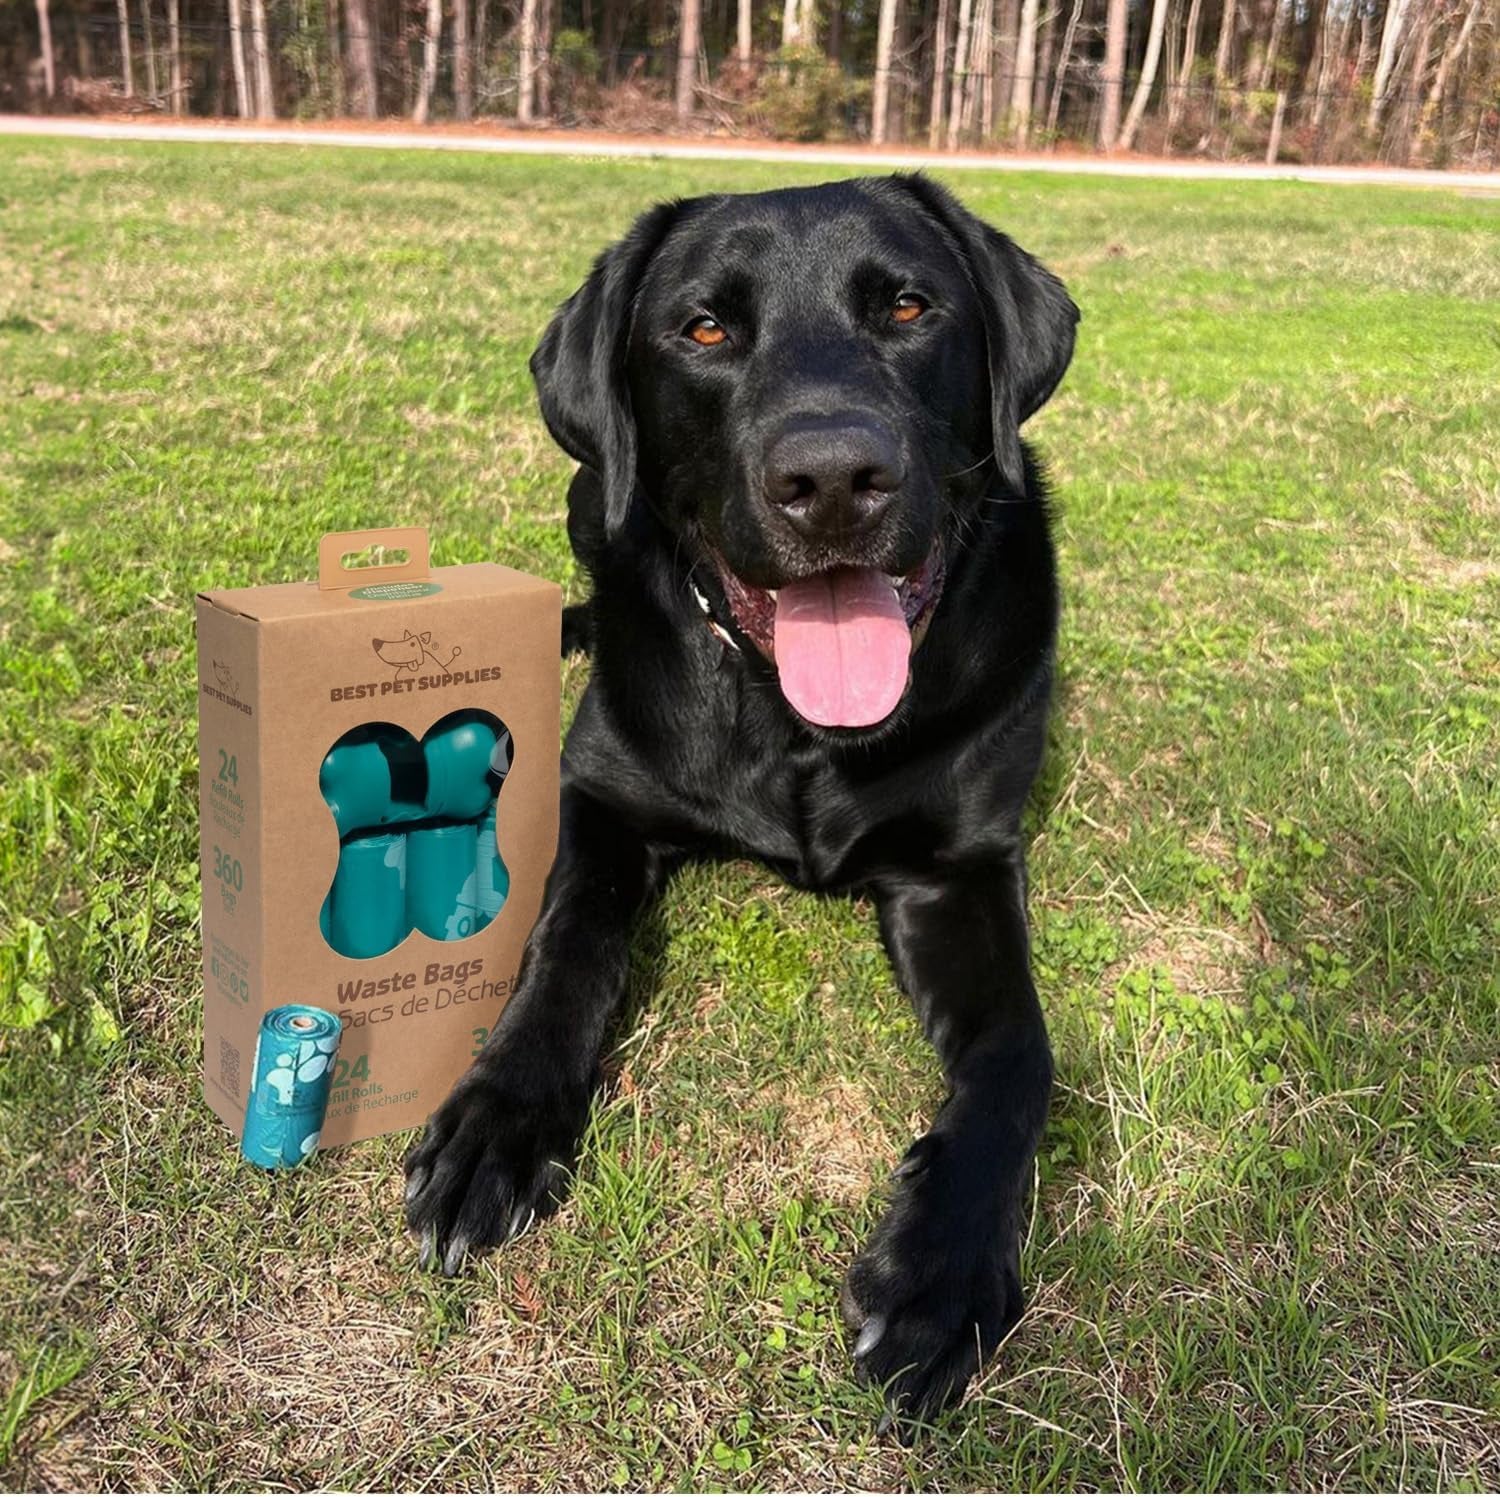 Dog Poop Bags (360 Bags) for Waste Refuse Cleanup, Doggy Roll Replacements for Outdoor Puppy Walking and Travel, Leak Proof and Tear Resistant, Thick Plastic - Turquoise